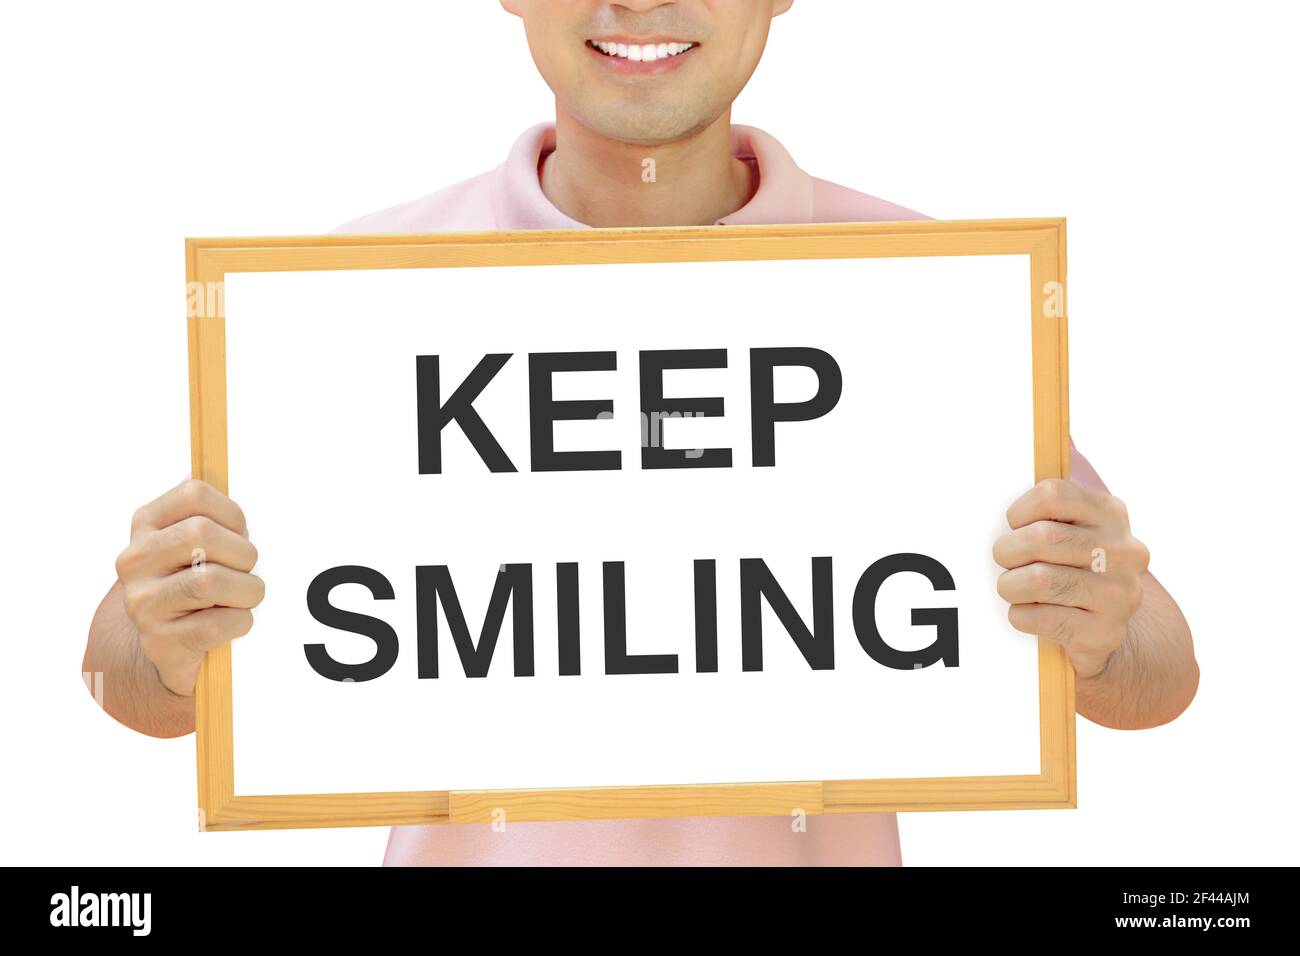 KEEP SMILING words on whiteboard held by smiling man Stock Photo